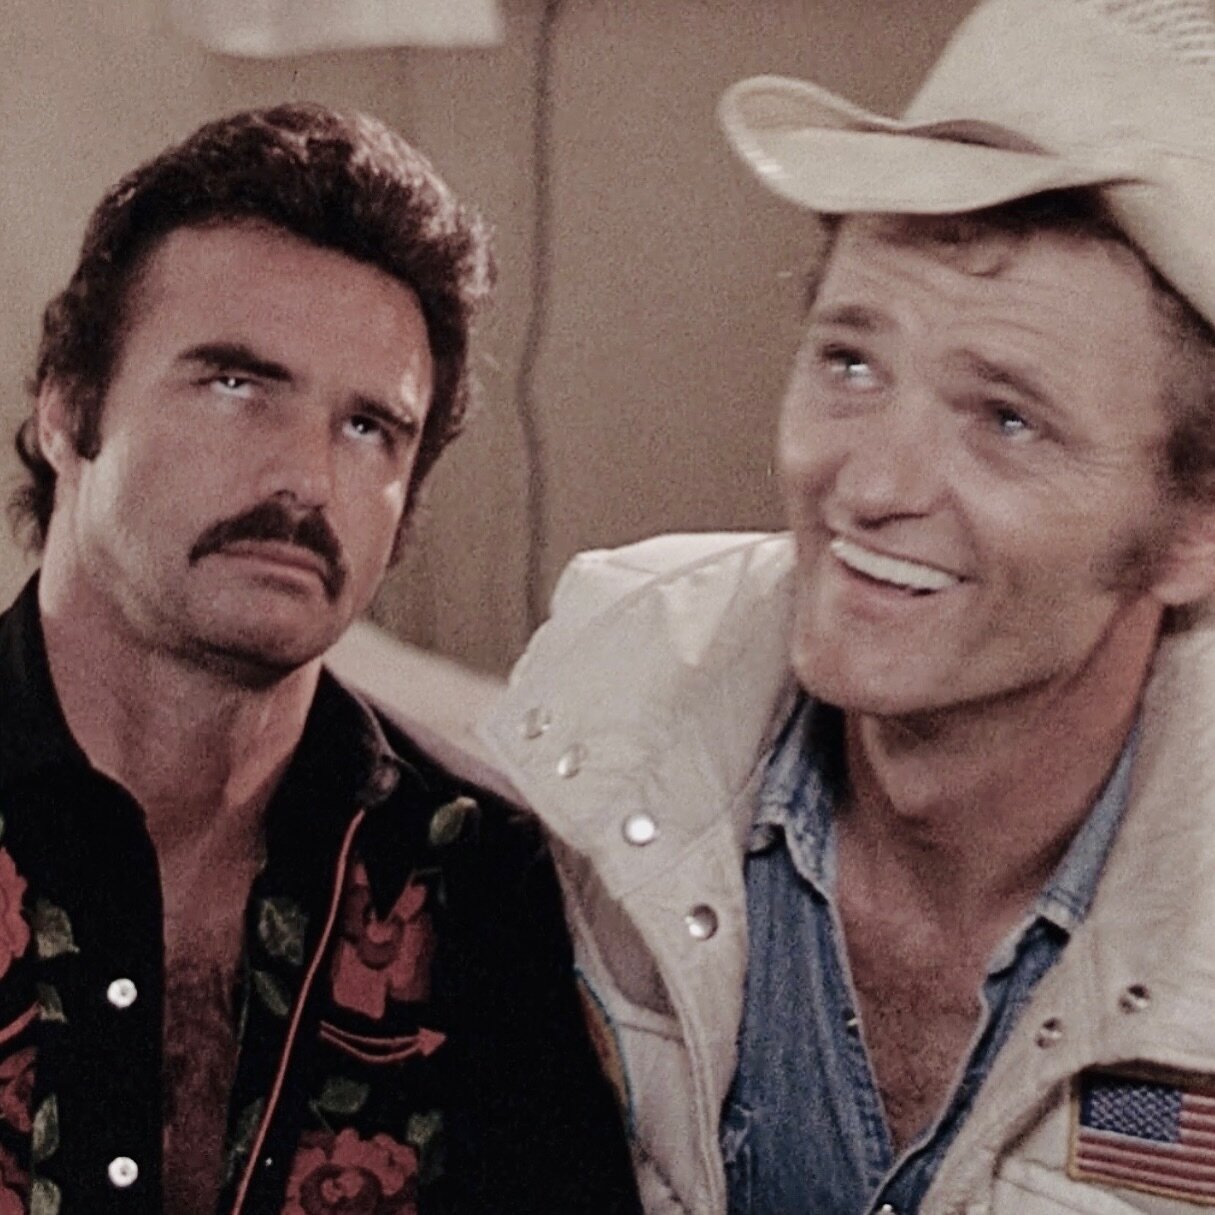 Tfw they make a big deal about the snow again&hellip; We&rsquo;re @skinnydennis bound and down 9-midnight so hightail it over there!
.
.
.
.
.
.
.
#brooklyncountrymusic #eastboundanddown #burtreynolds #jerryreed #outlawcountrymusic